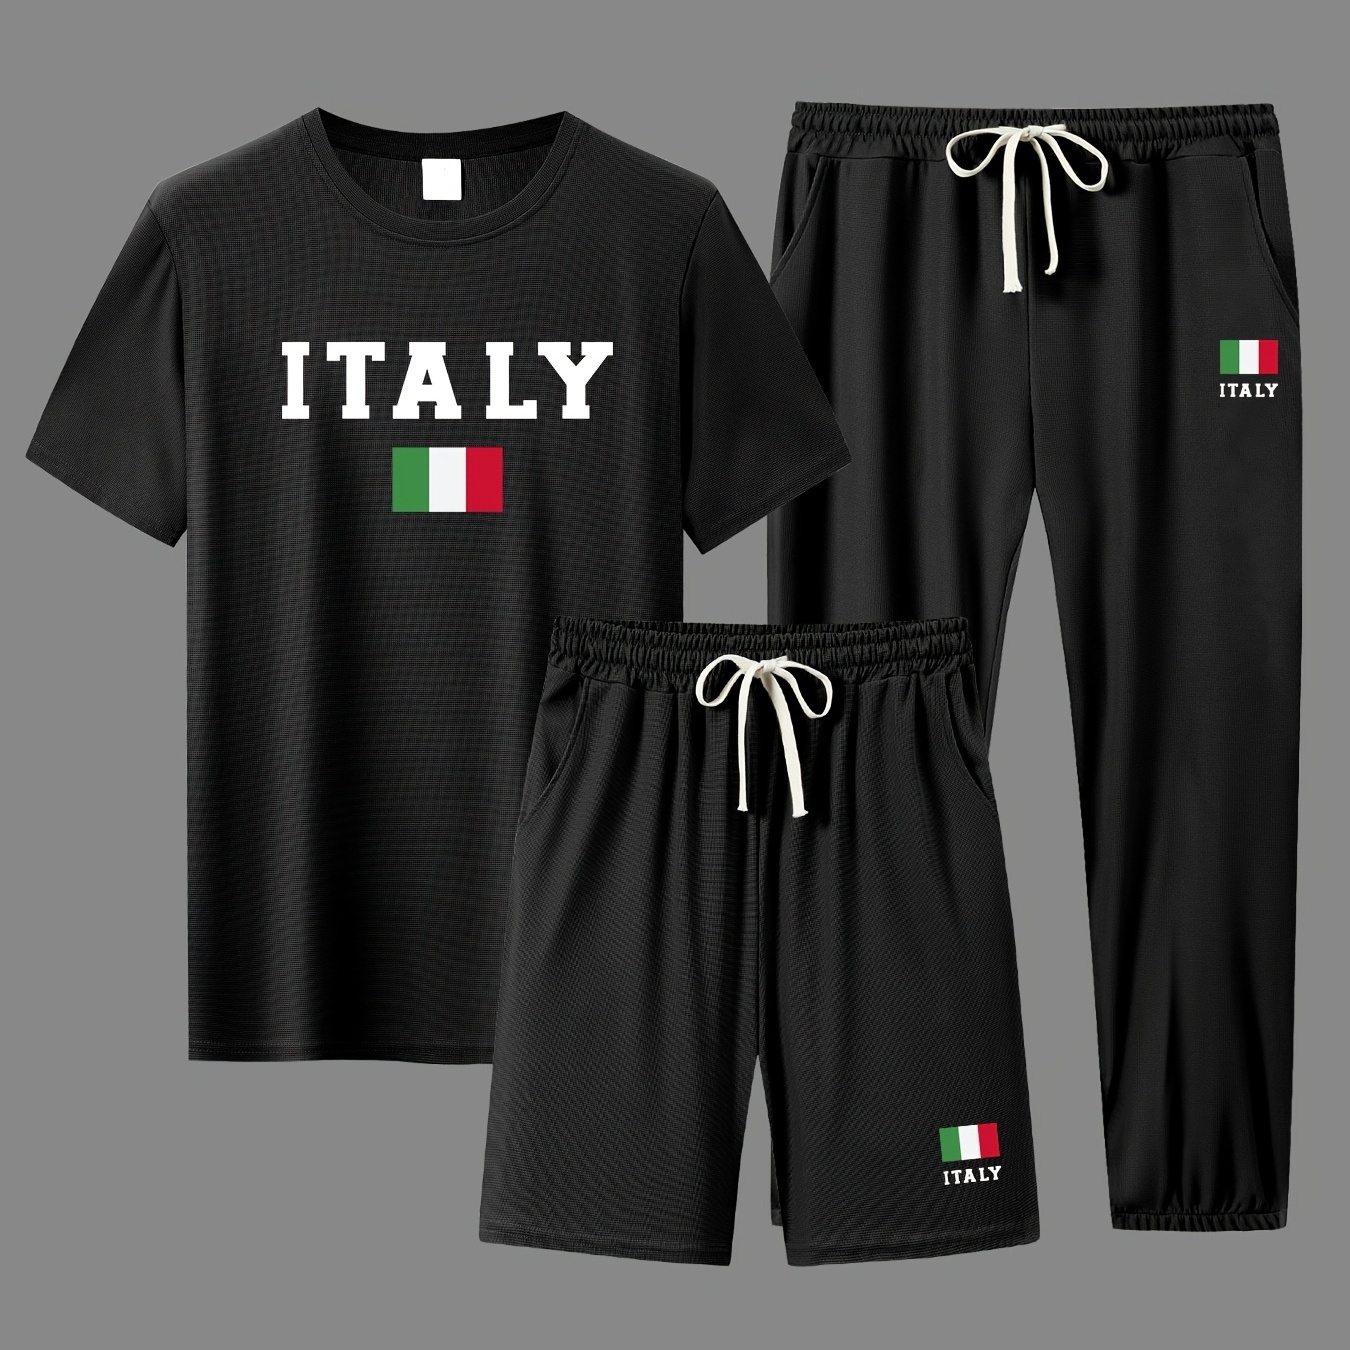 

Italy Men's 3-piece Casual Sports Set, Short Sleeve Round Neck T-shirt And Shorts And Pants Set, Breathable Summer Clothing